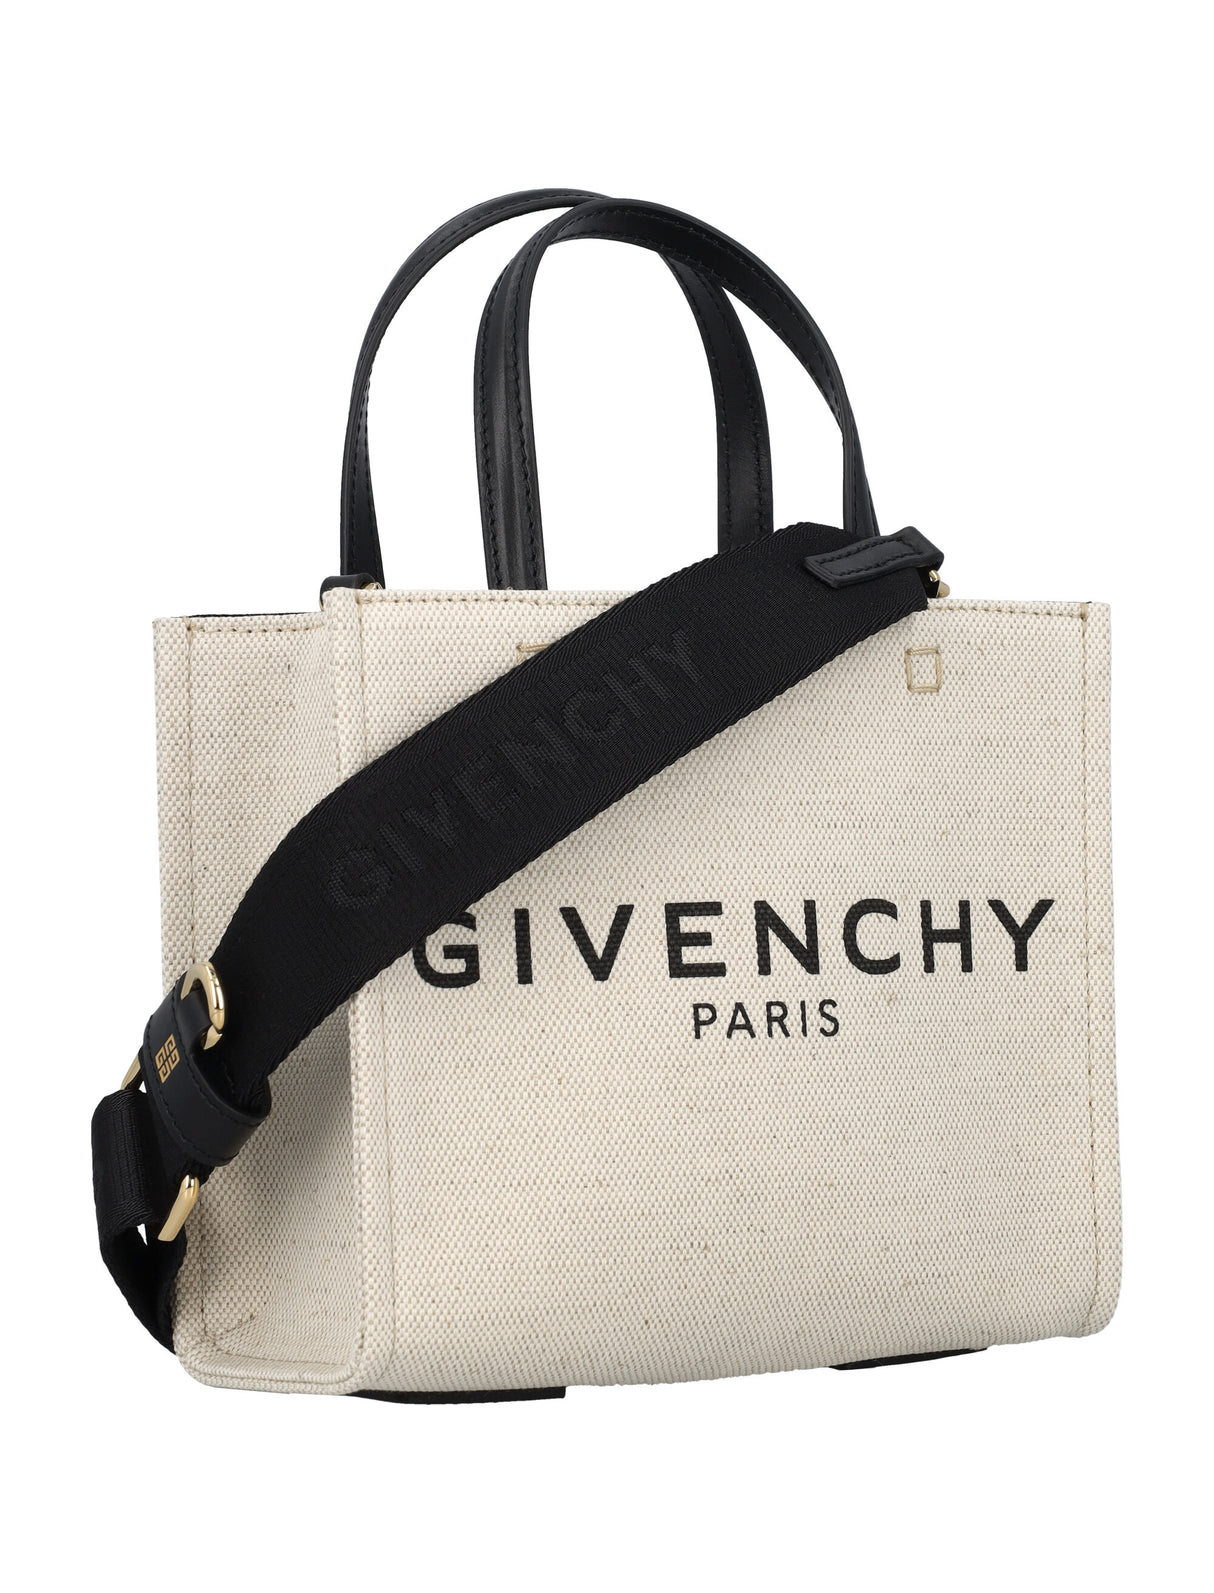 GIVENCHY Beige Mini G-Tote Handbag with Removable Strap and Logo Detail